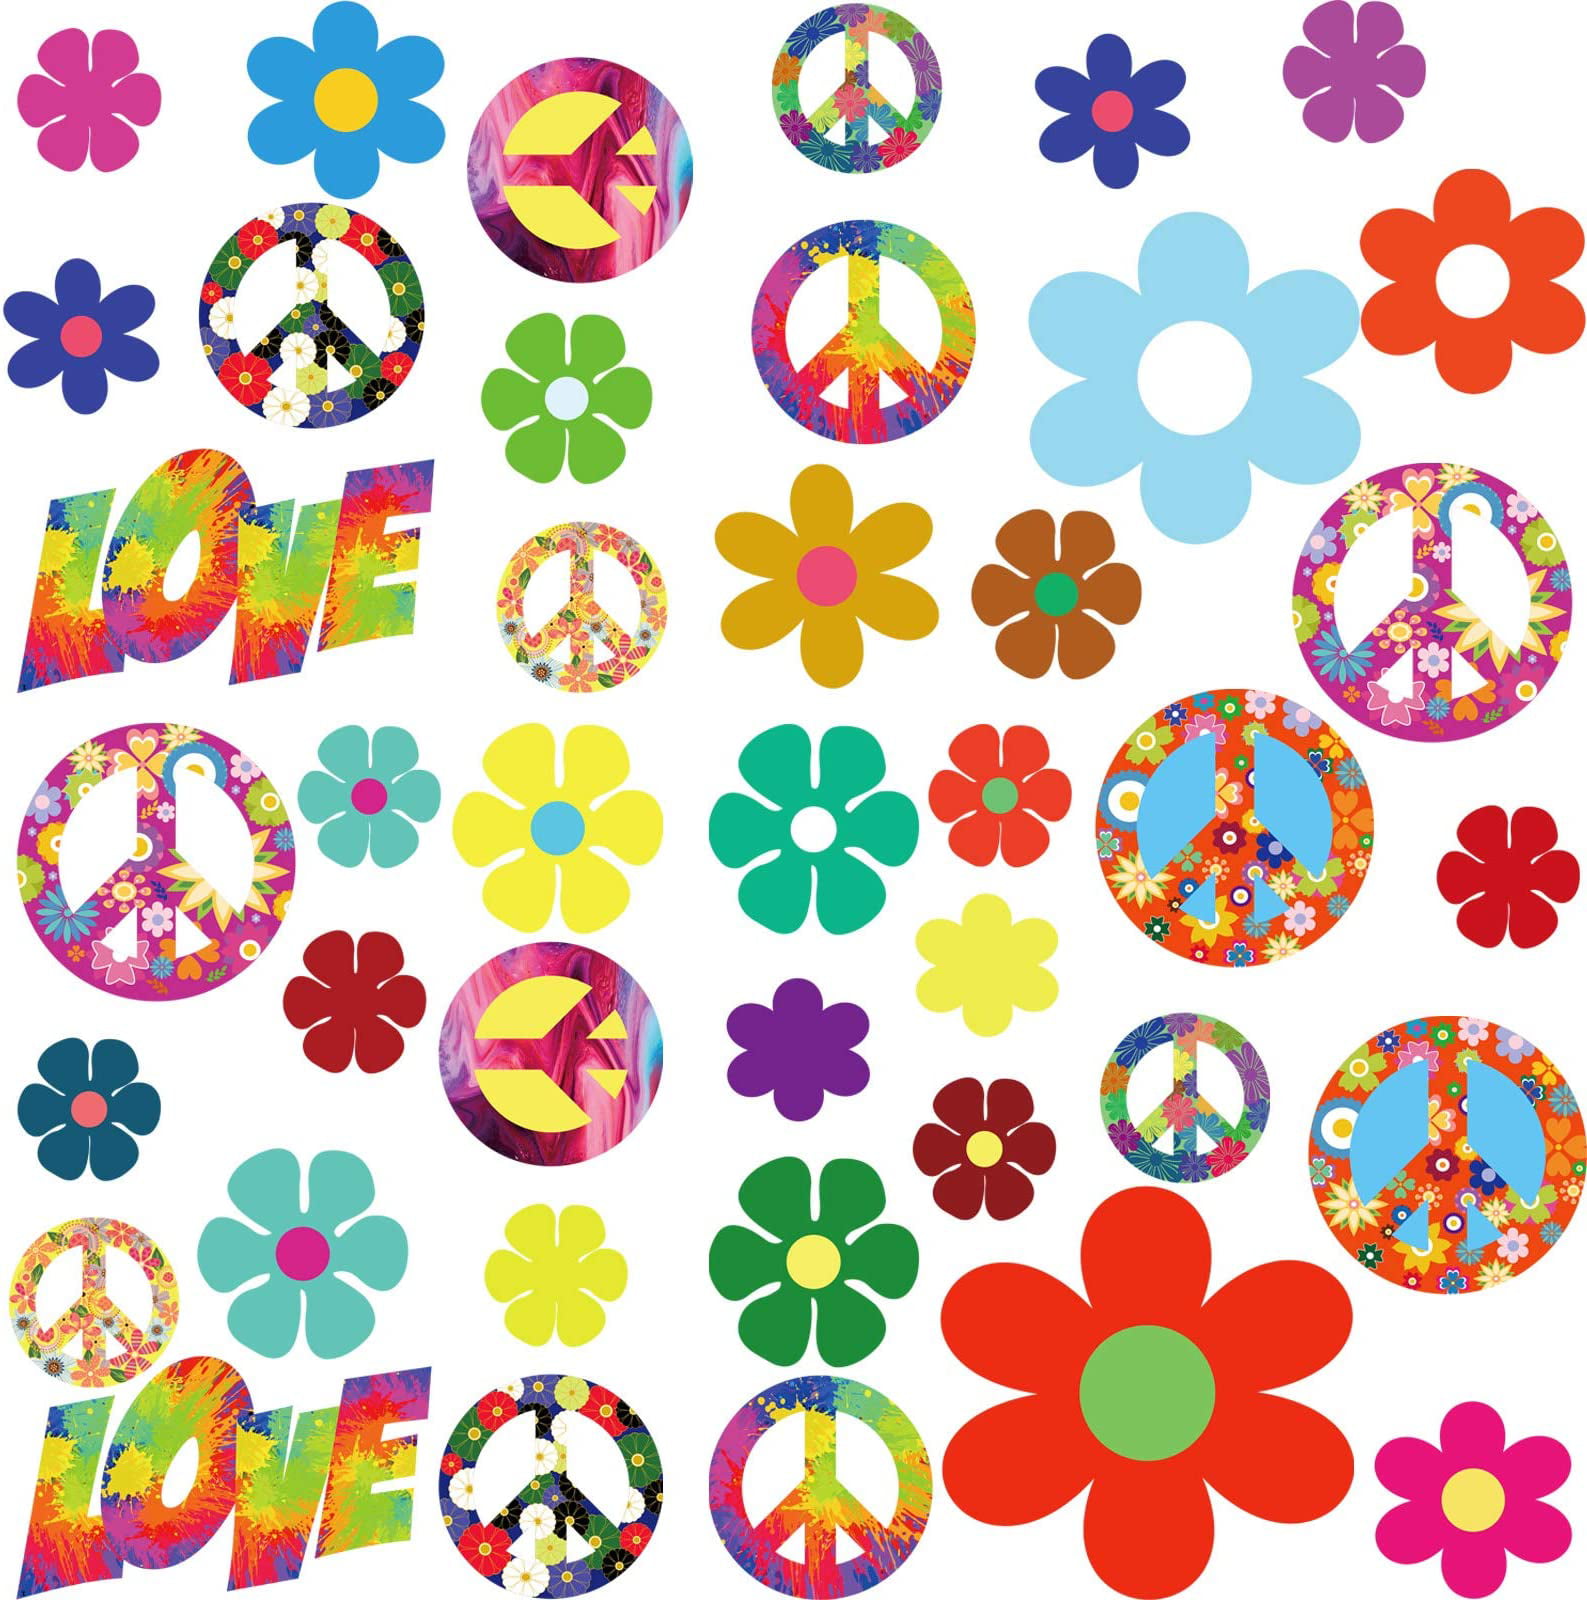 20 2" tiles stickers jewelry making scrapbooking crafts flowers hat cat peace